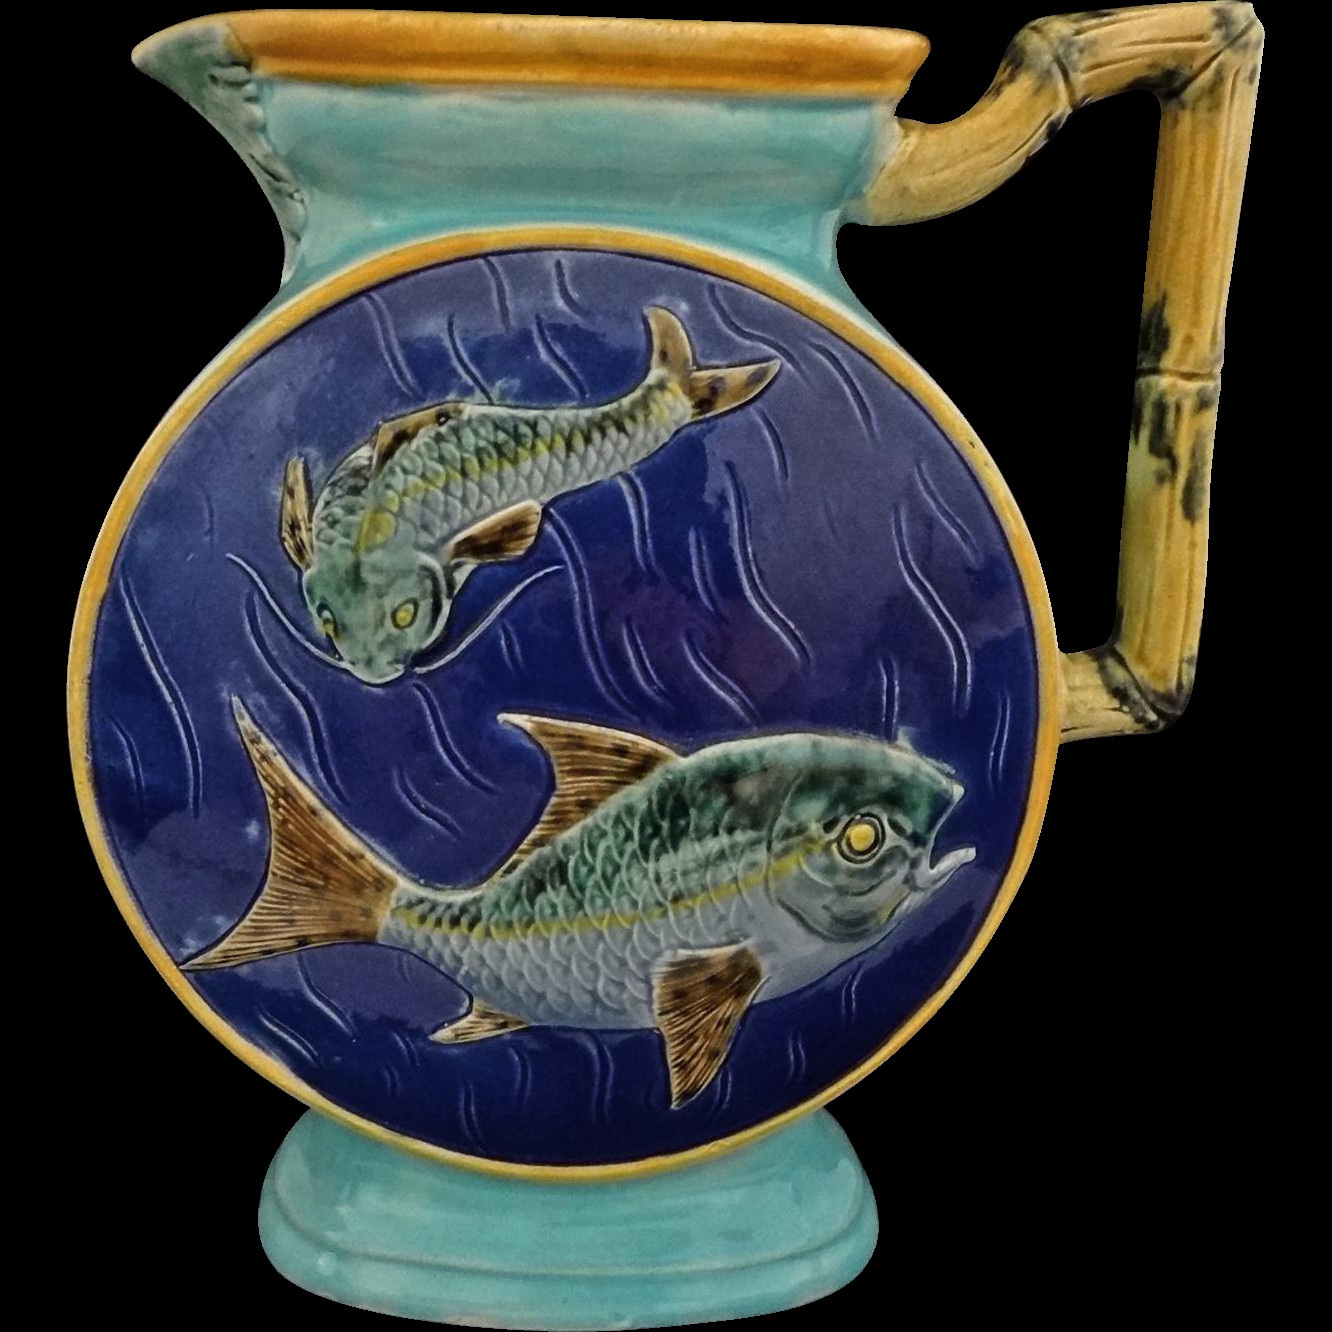 16 Perfect Ceramic Fish Vase 2024 free download ceramic fish vase of antique english majolica joseph holdcroft bamboo handle fish pitcher intended for antique english majolica joseph holdcroft bamboo handle fish pitcher blue turquoise mar